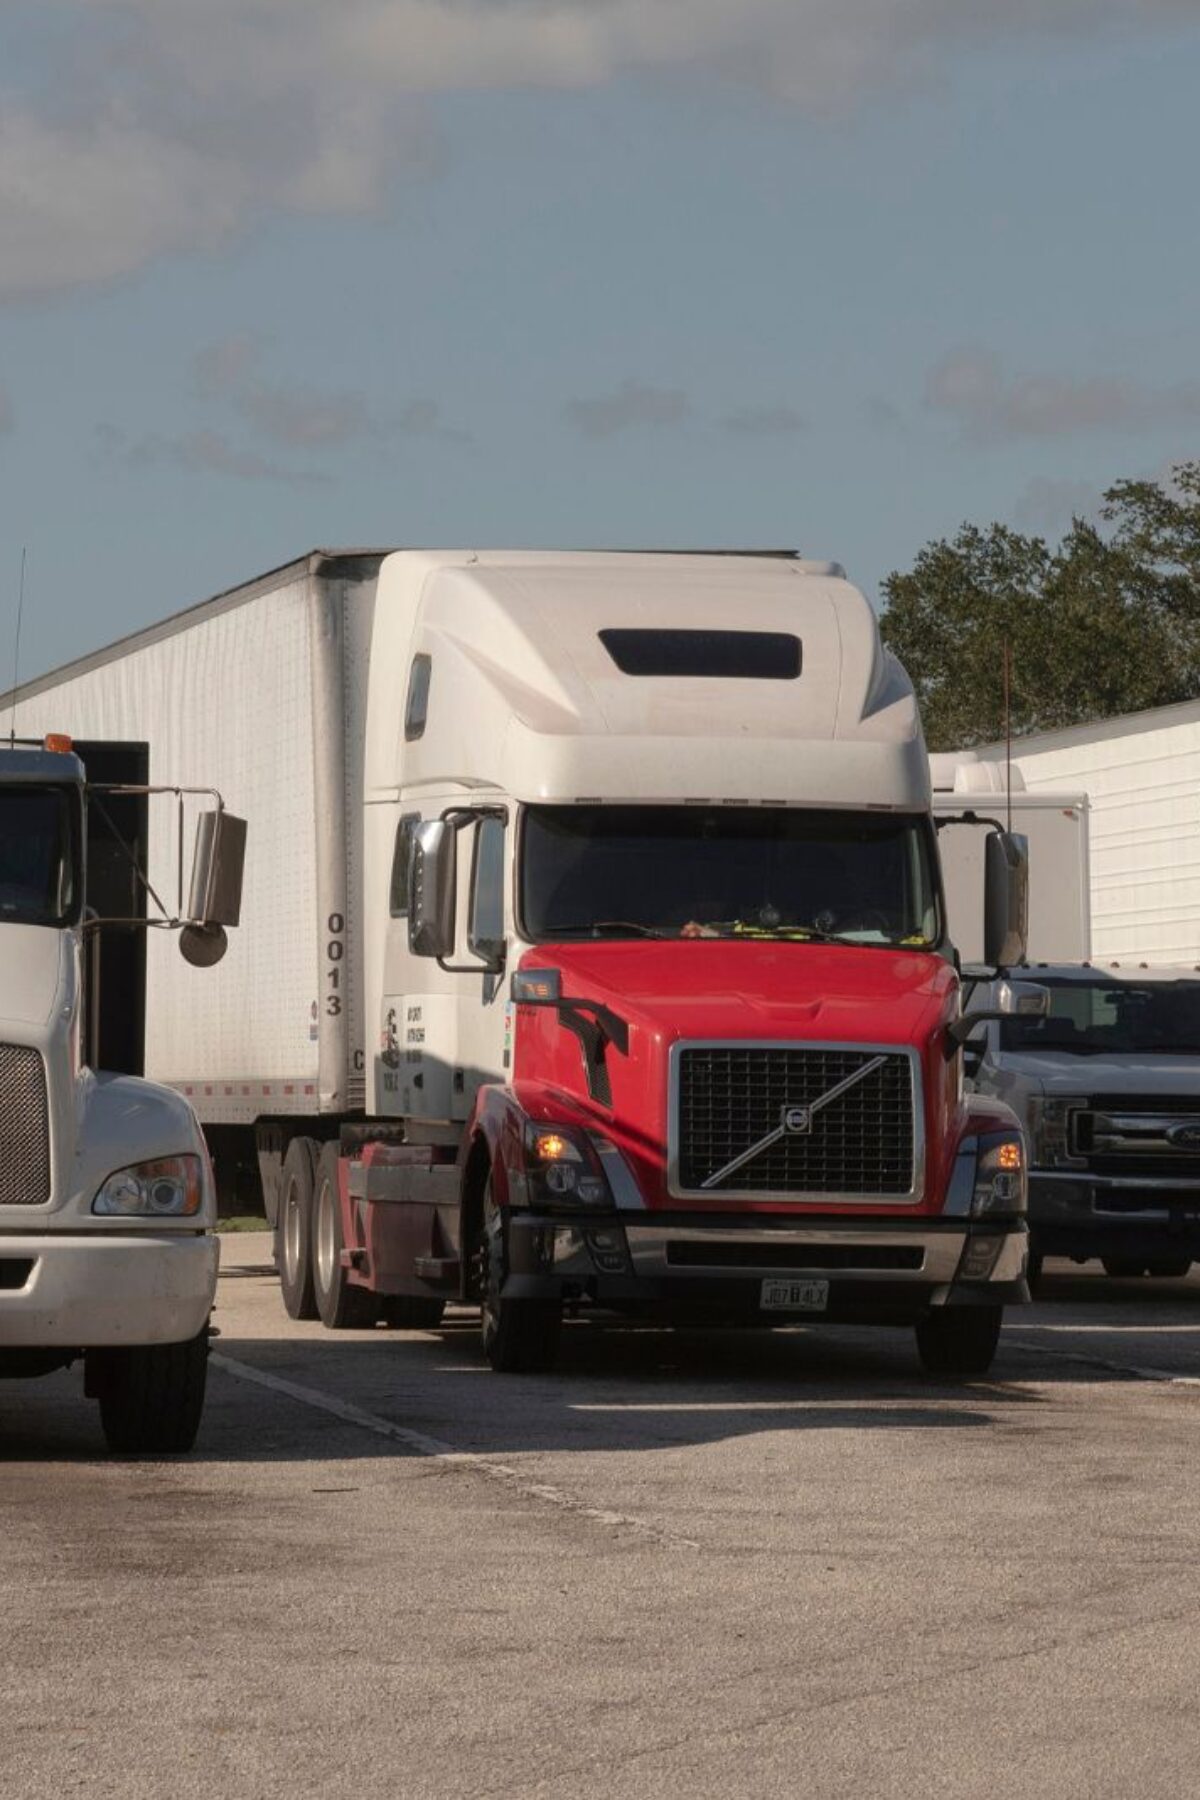 Central Florida, Truck stop rest area in Florida with trucks lined up off the highway. (Photo by: Peter Titmuss/UCG/Universal Images Group via Getty Images)